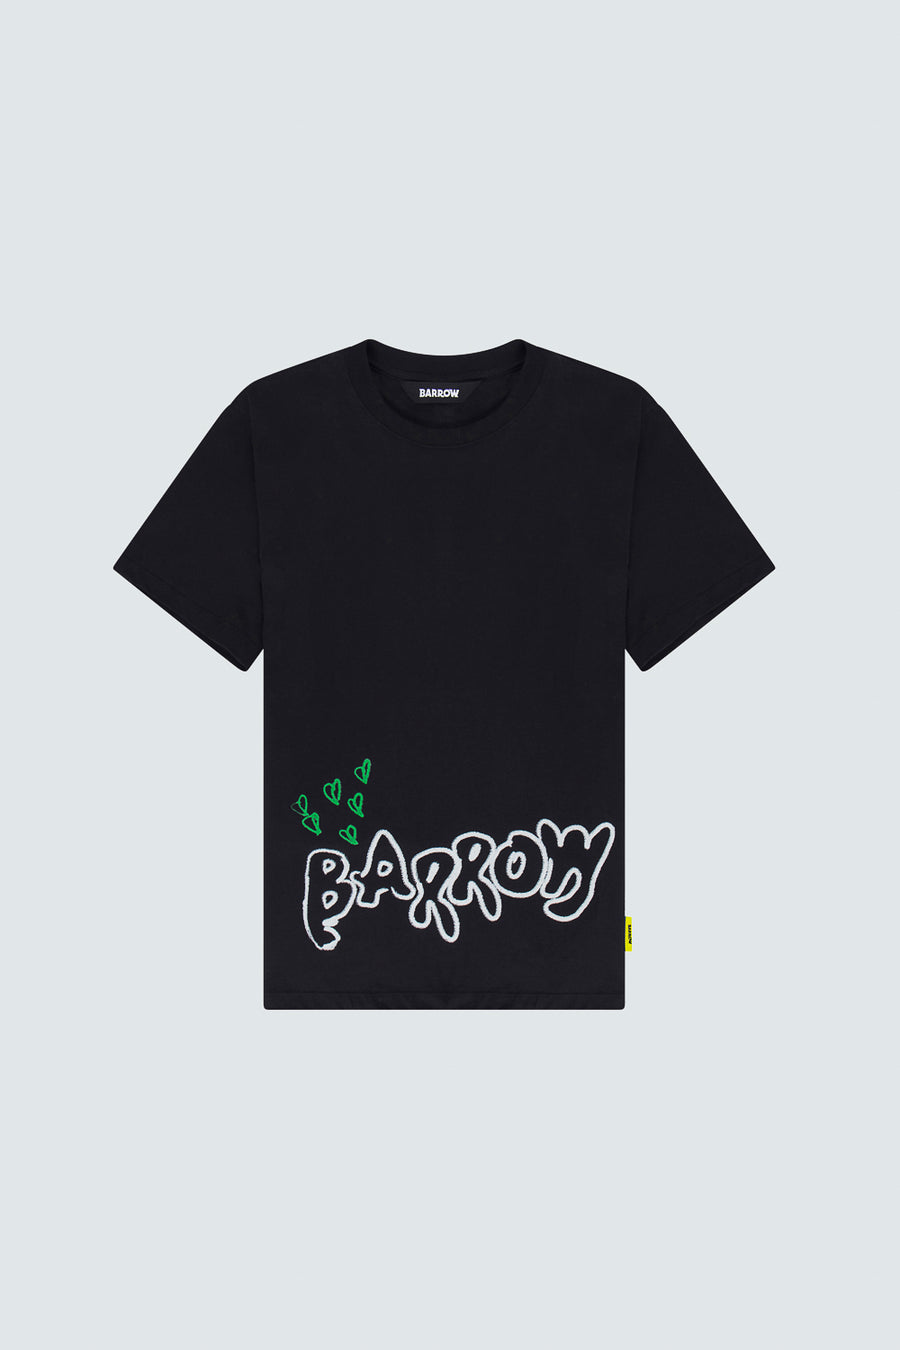 Buy the Barrow Back Design T-Shirt in Black at Intro. Spend £50 for free UK delivery. Official stockists. We ship worldwide.